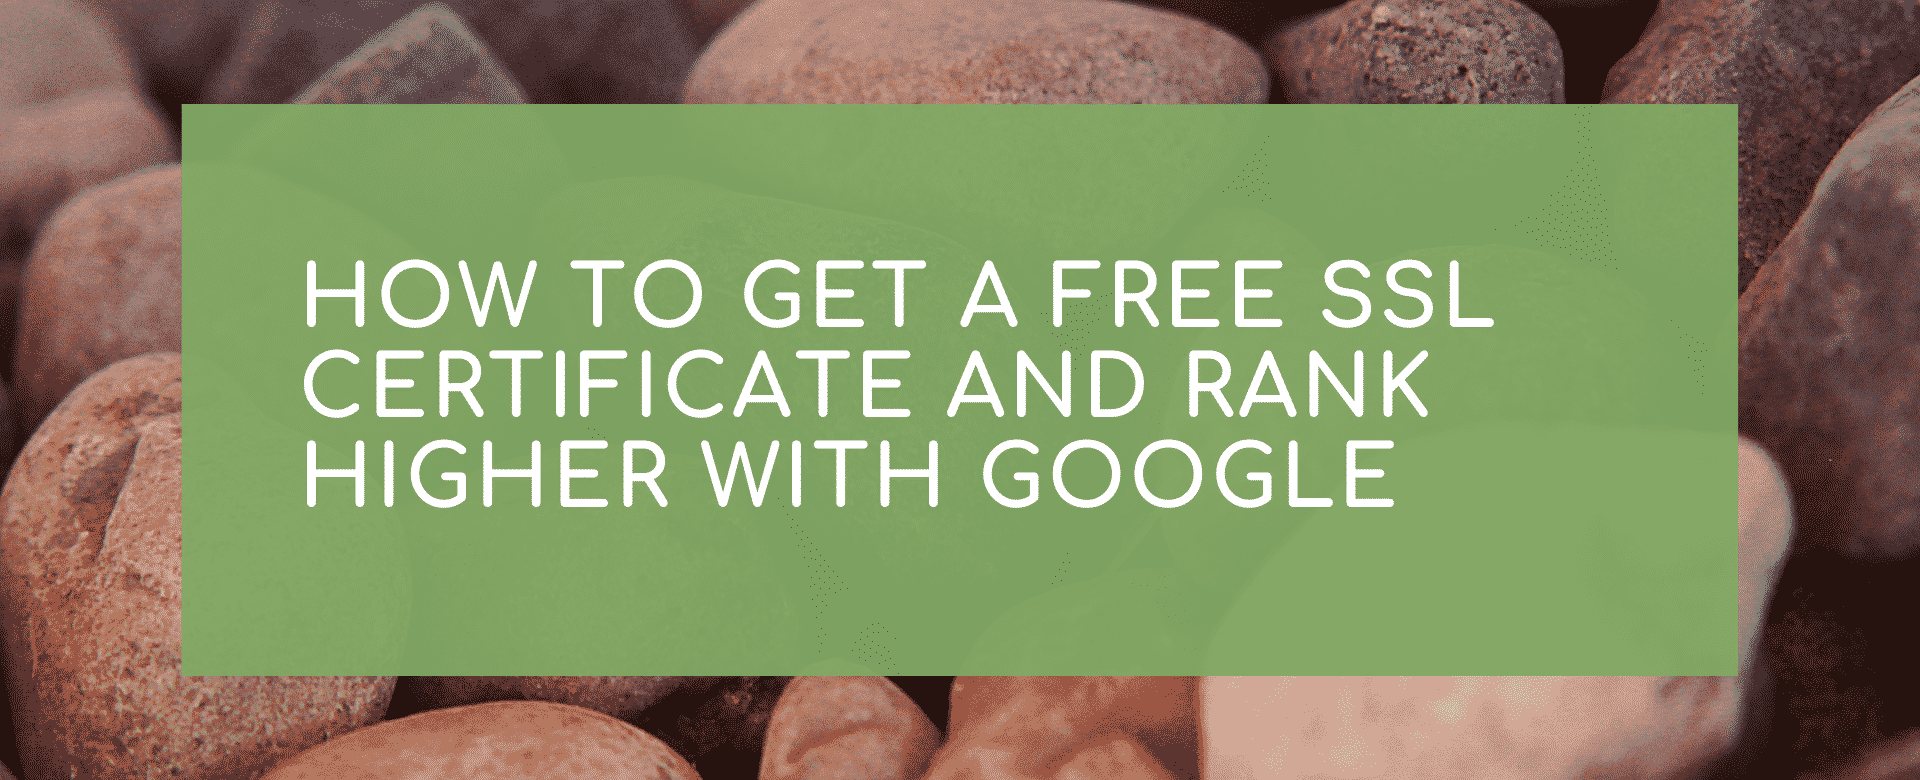 How to get a free SSL certificate and rank higher with Google